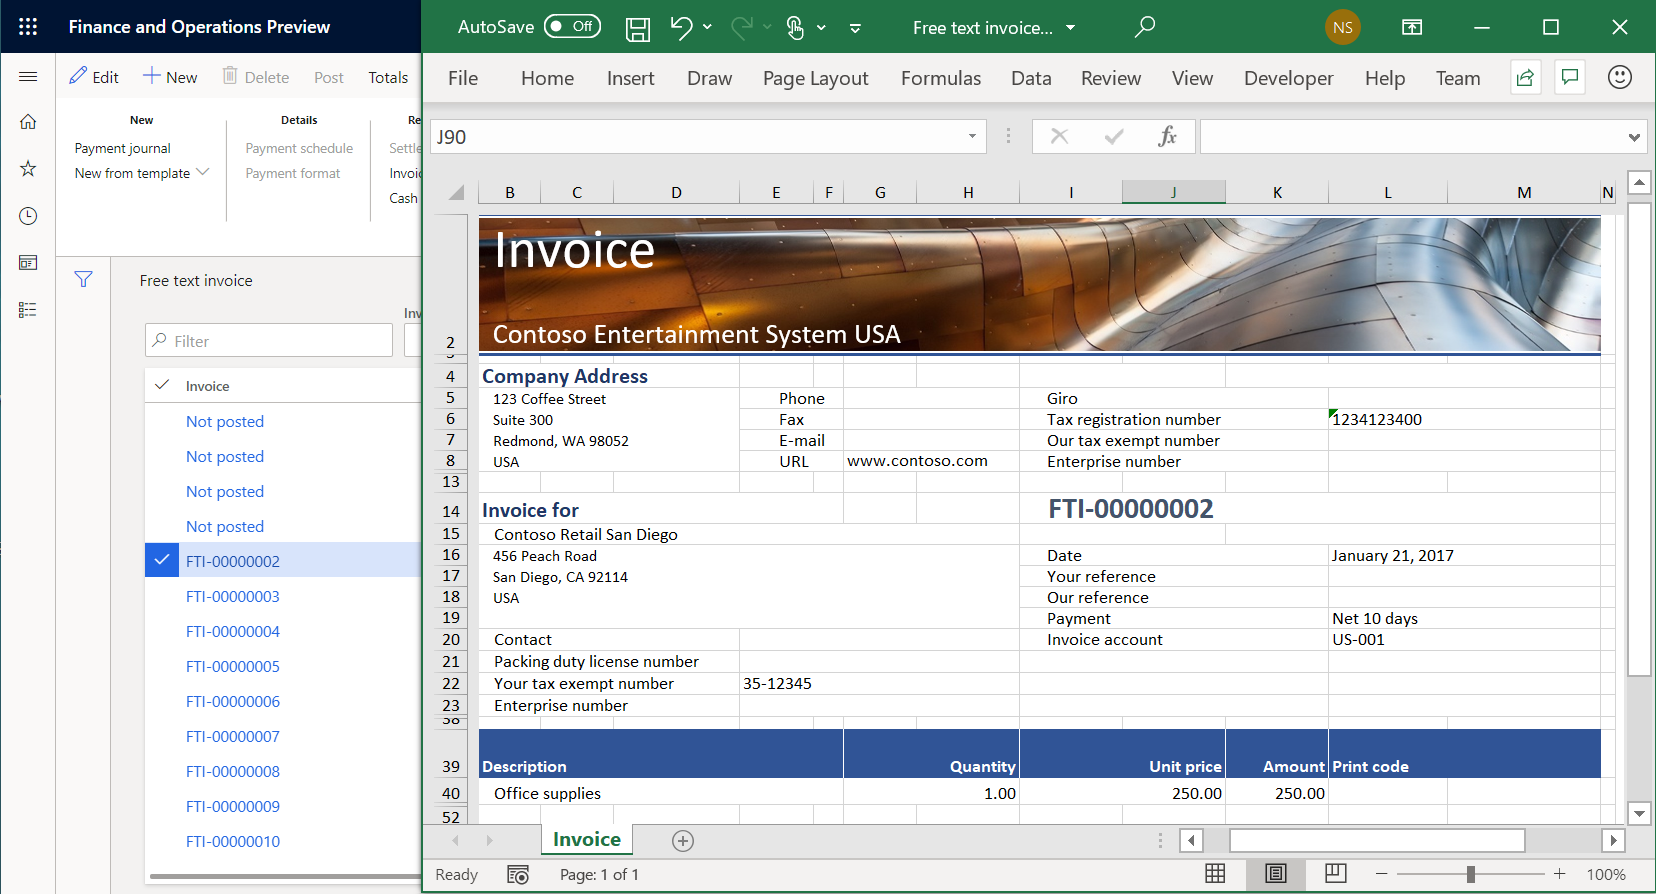 Free text invoice in Excel.